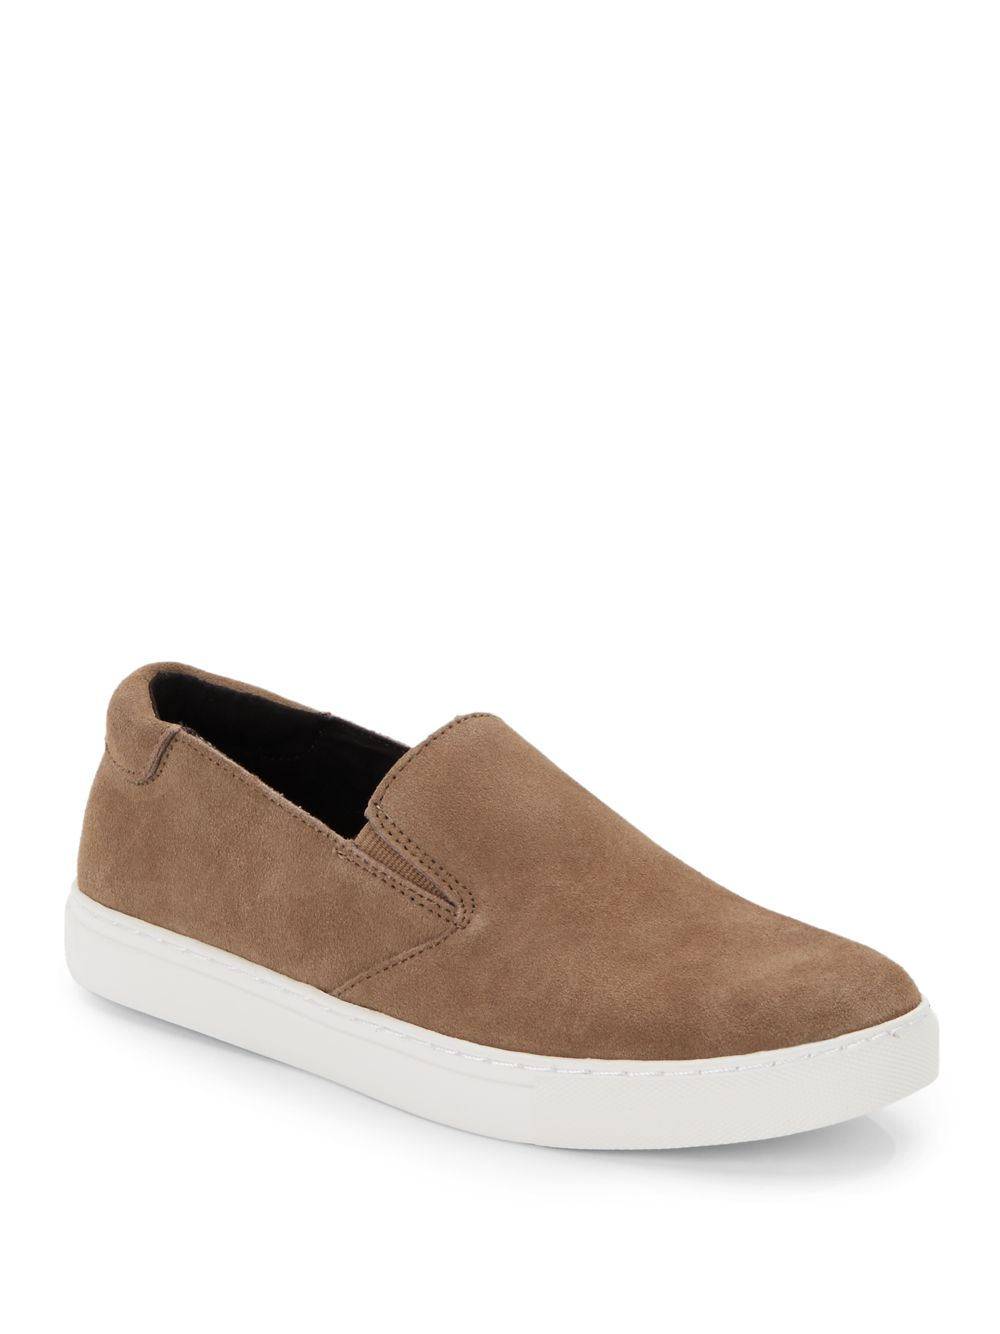 Kenneth cole Kit Suede Slip-on Wedge Sneakers in Natural | Lyst